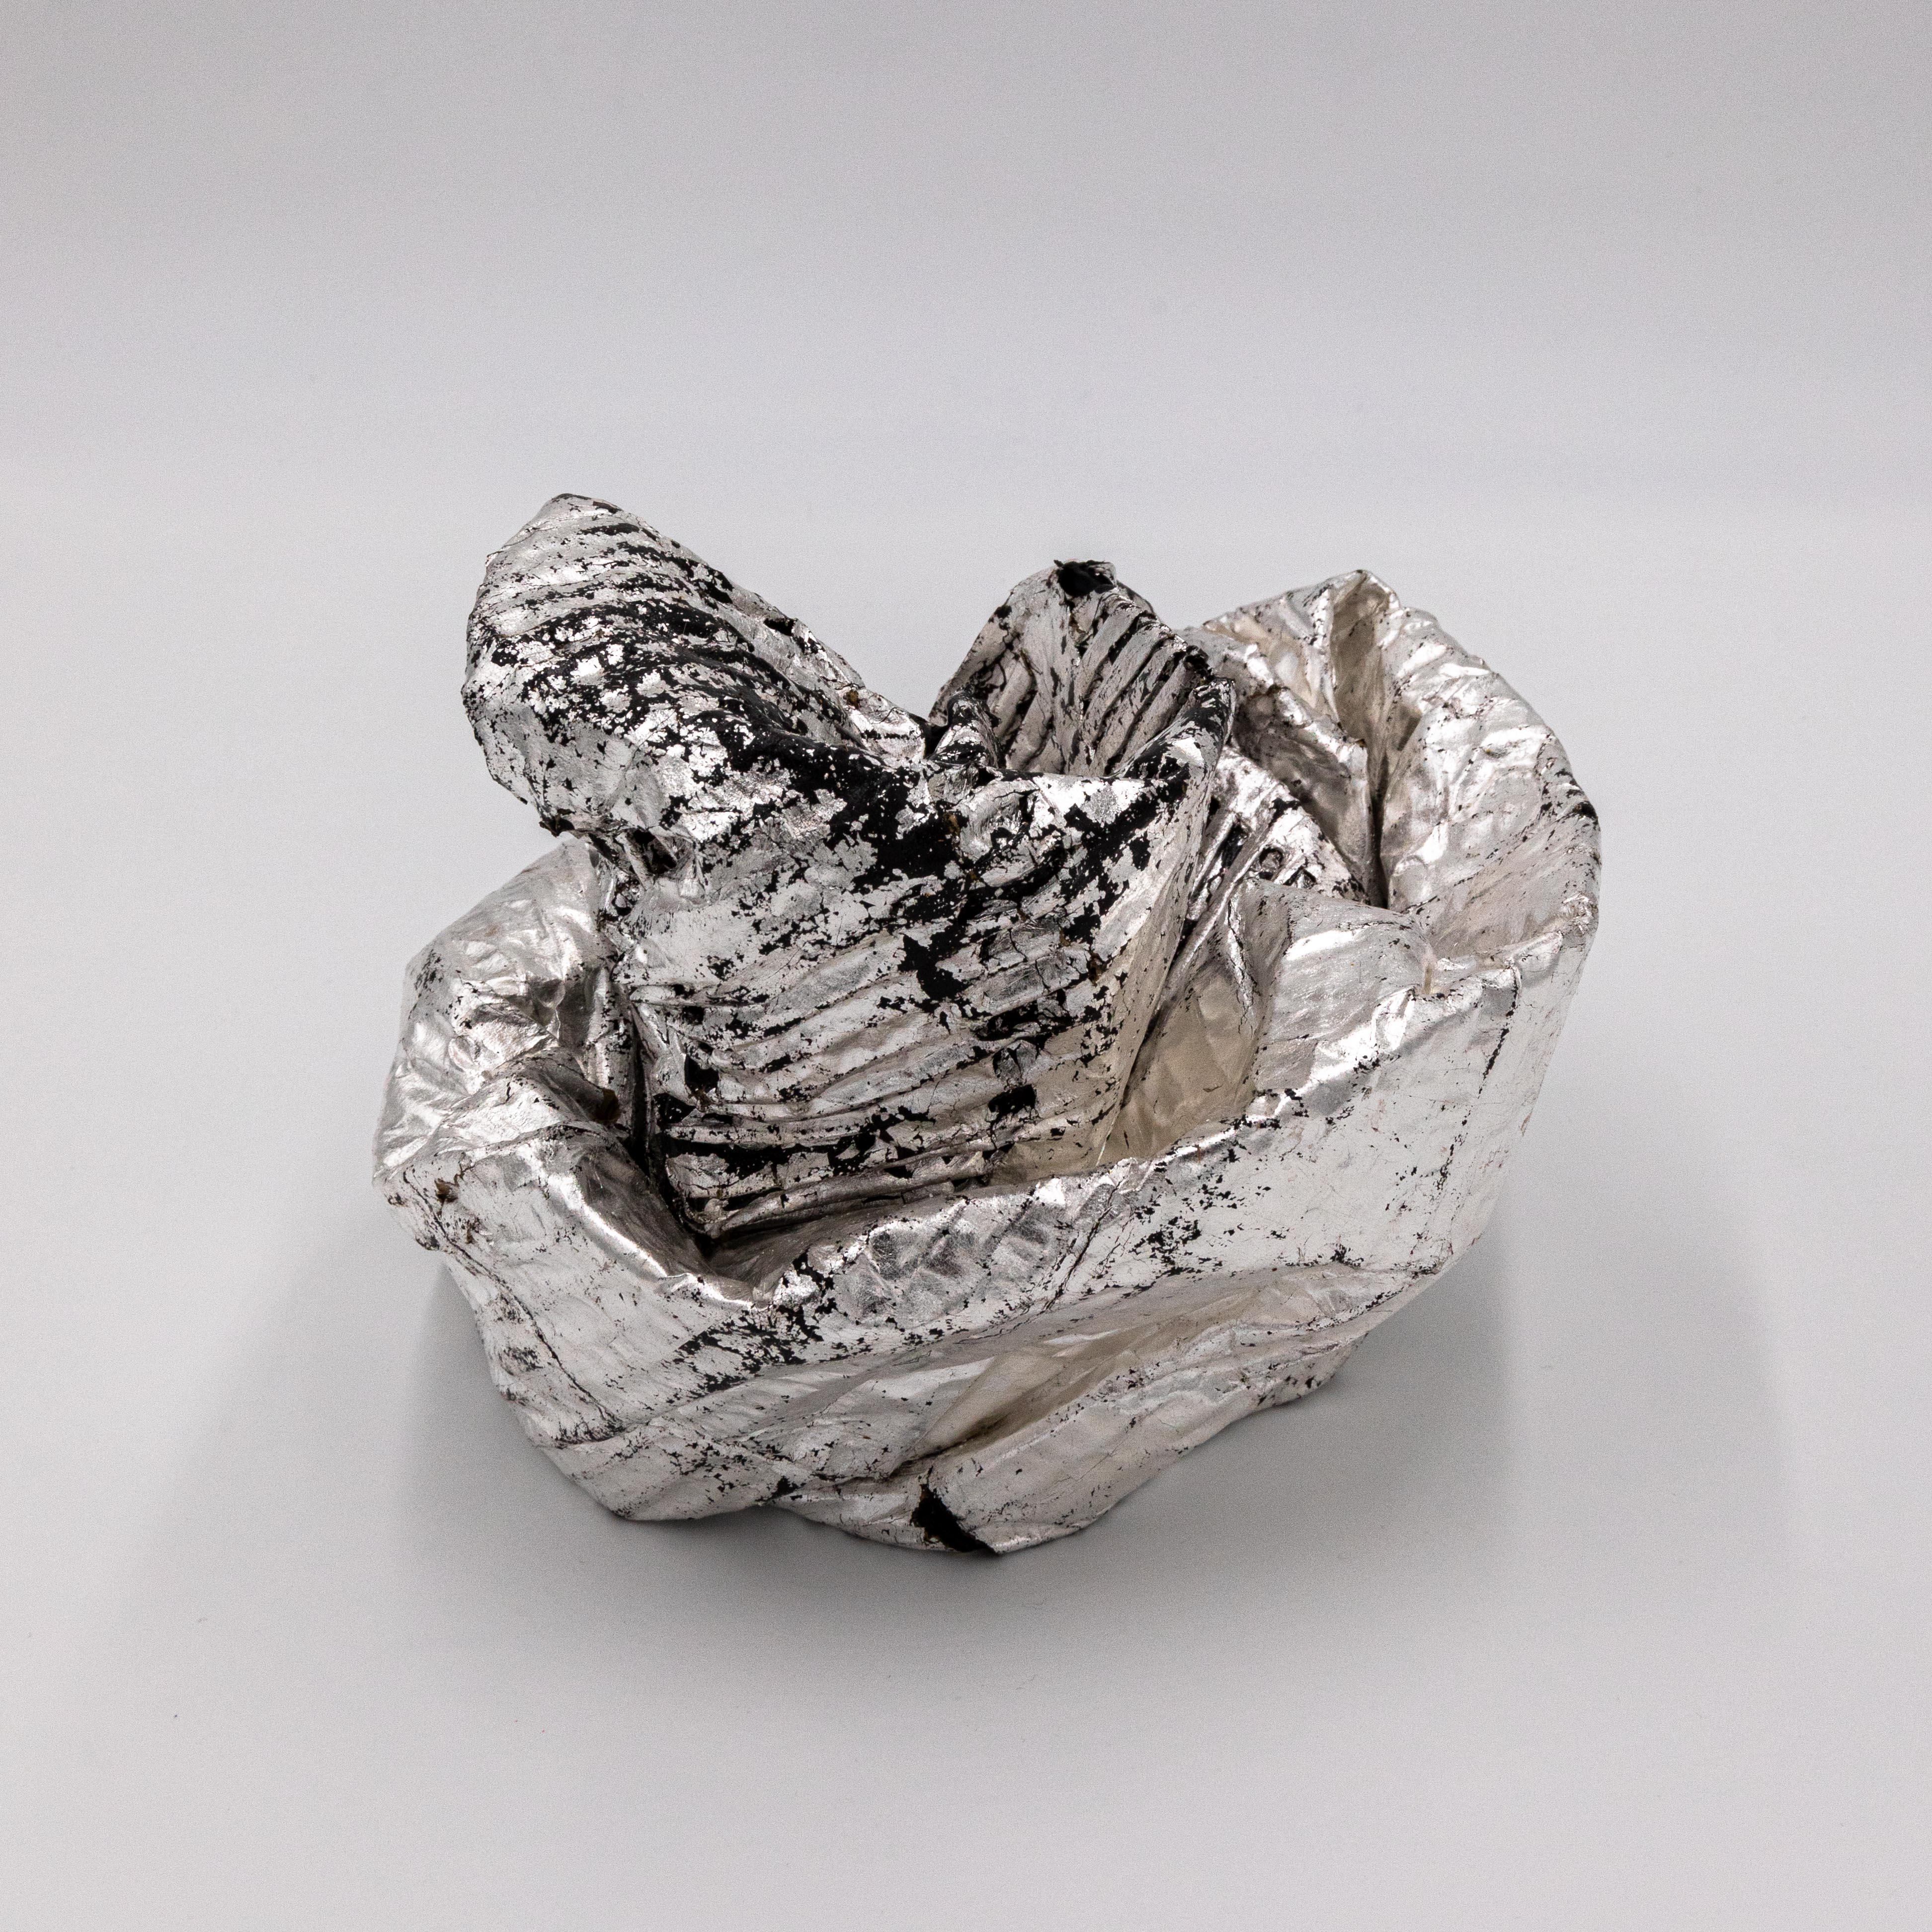 Cardboard, silver leaf, gilder’s bole

This work was created for an exhibit as part of the artistic unit SHIKŌ, a collaborative effort between sculptors Kanji Hasegawa, Isaji Yugo, and Kojun.

The pieces transform everyday items into alters,